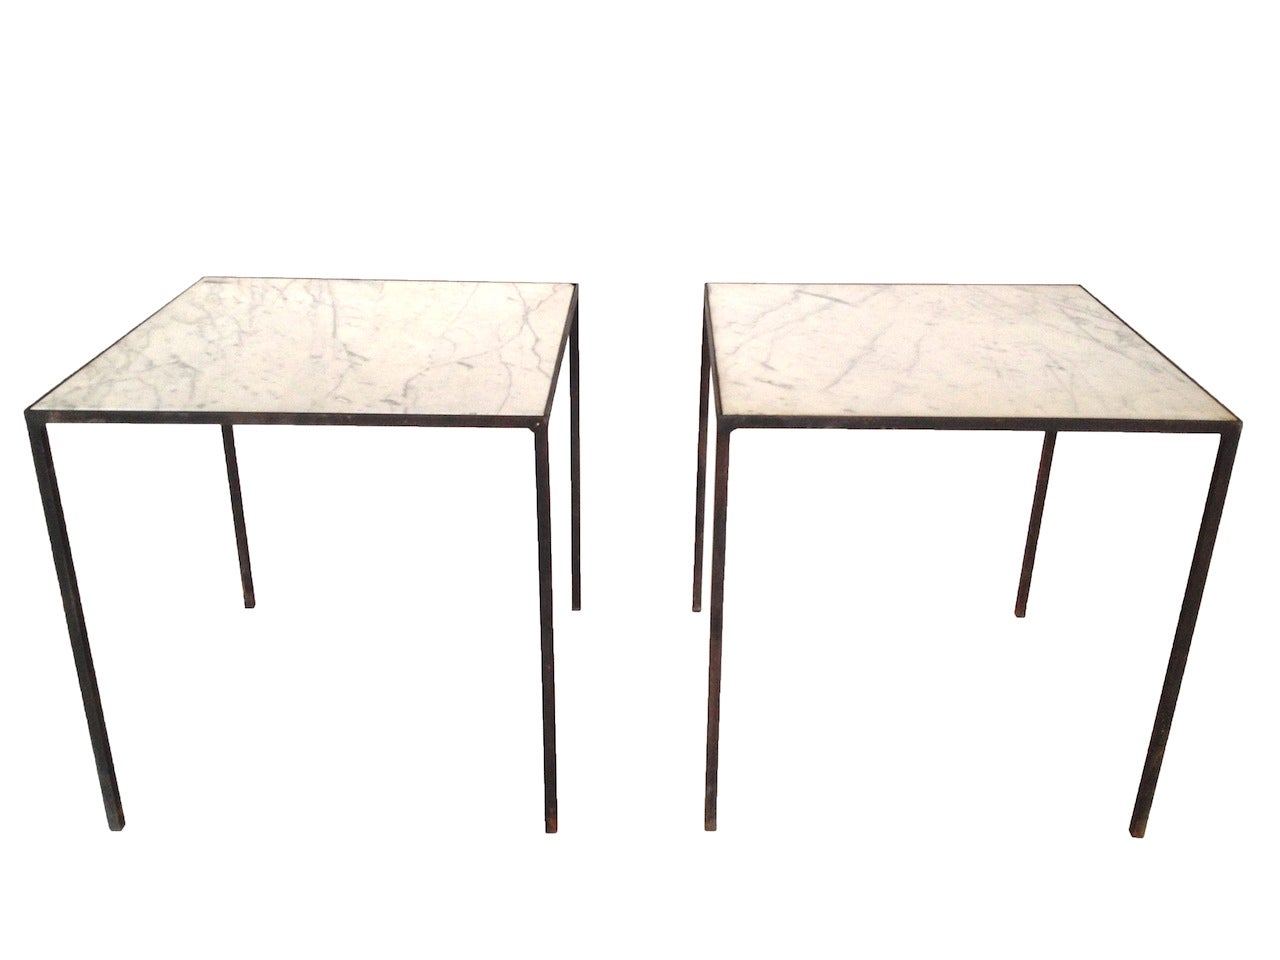 Pair of Iron End Tables with Marble Tops